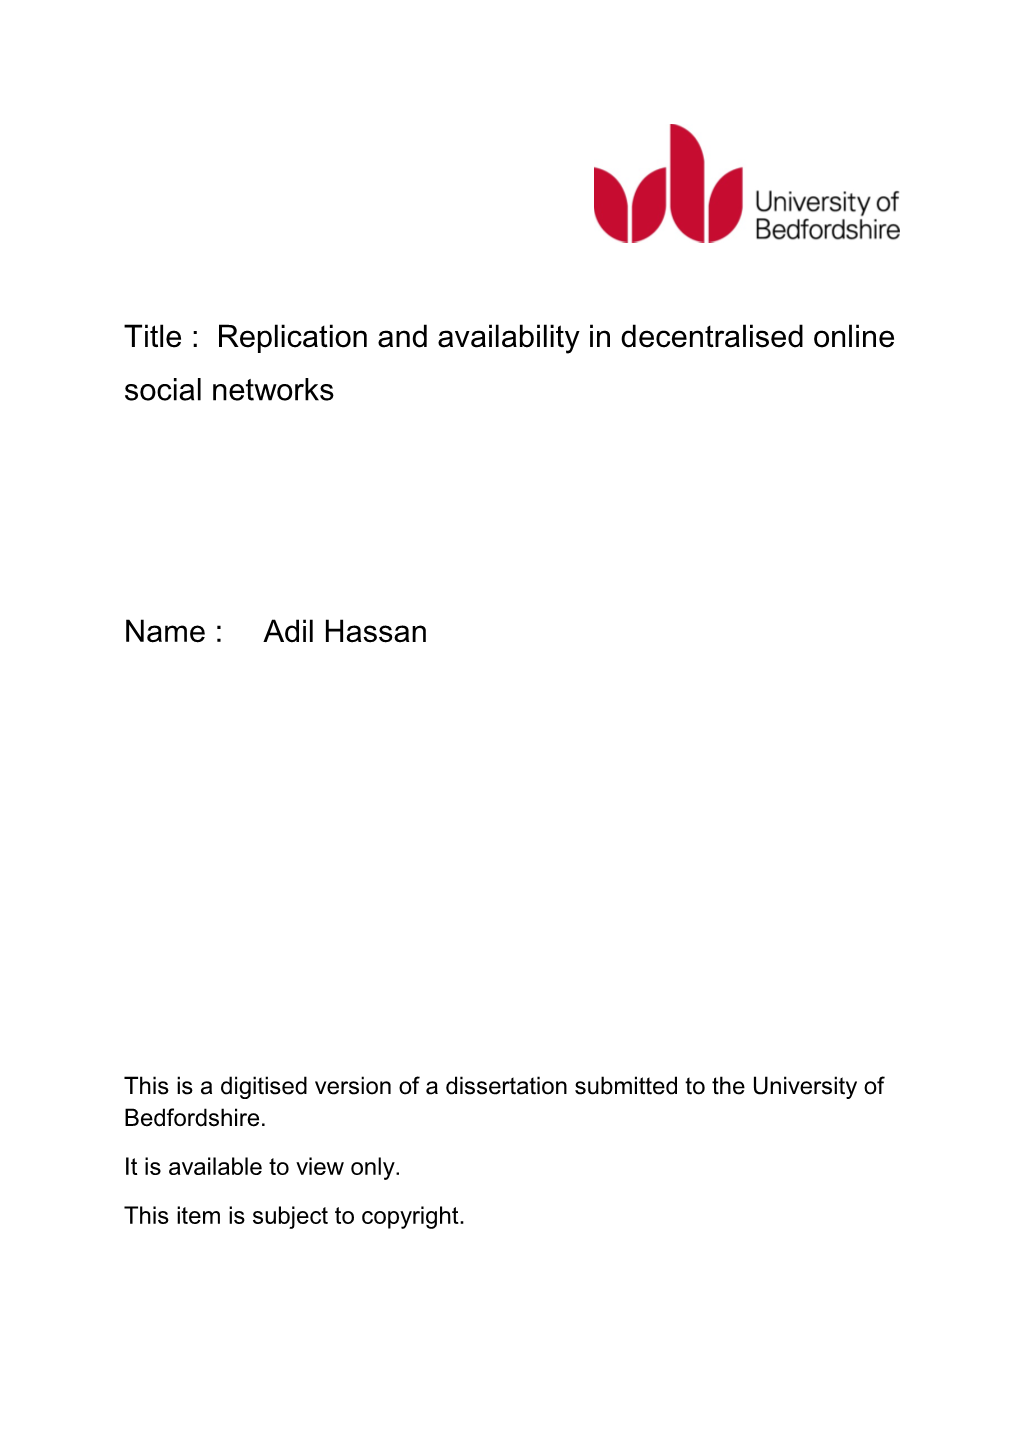 Title : Replication and Availability in Decentralised Online Social Networks